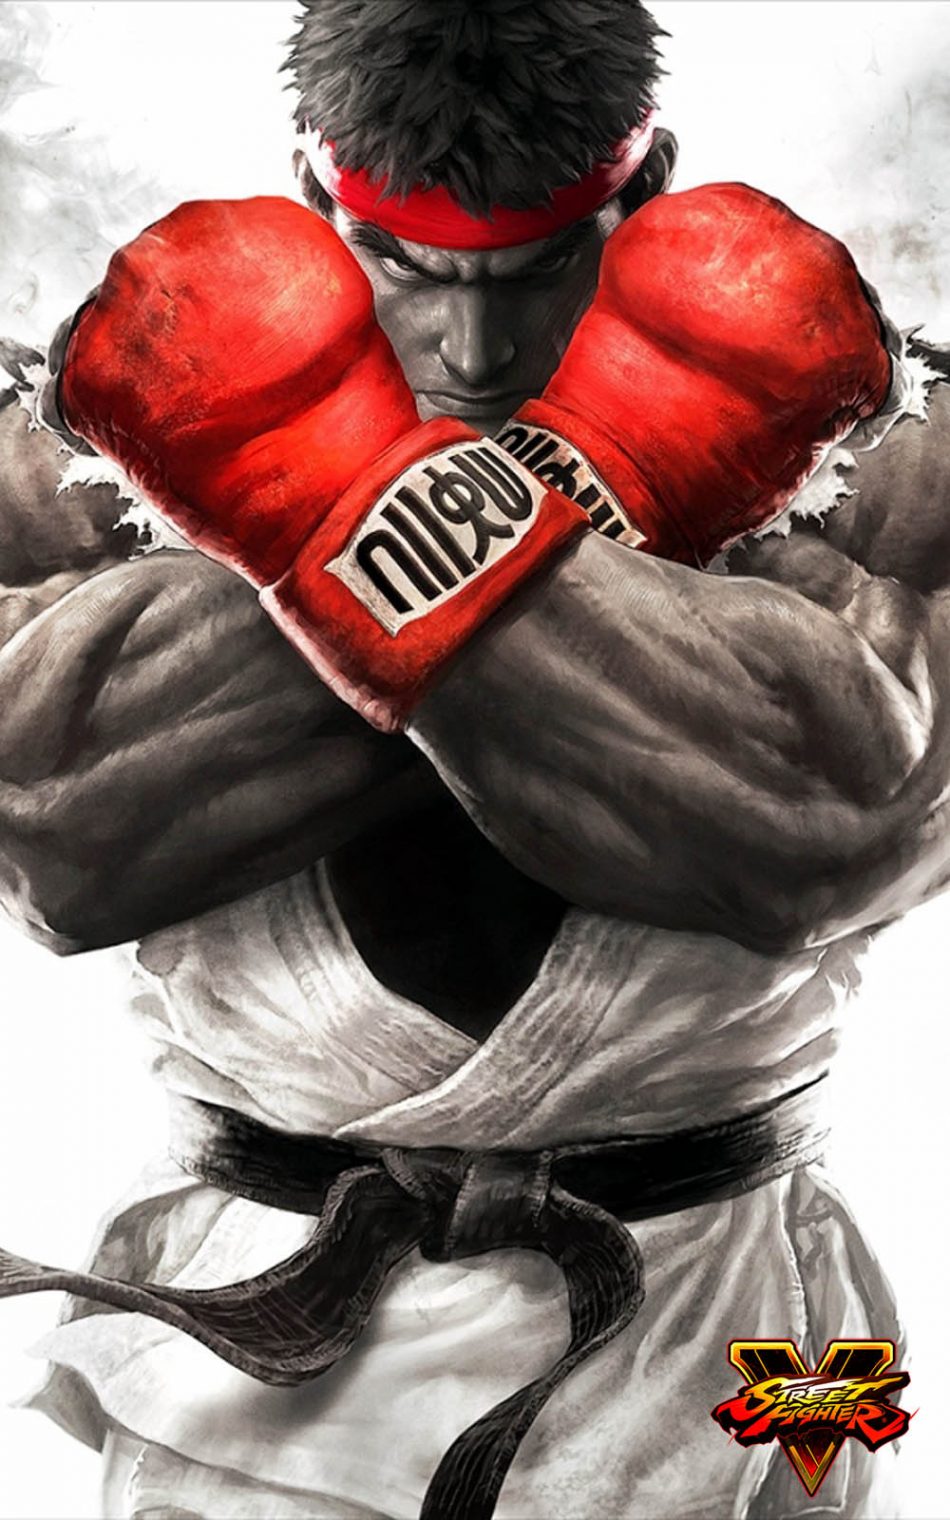 ryu street fighter wallpaper,boxing,boxing glove,professional boxer,professional boxing,punch